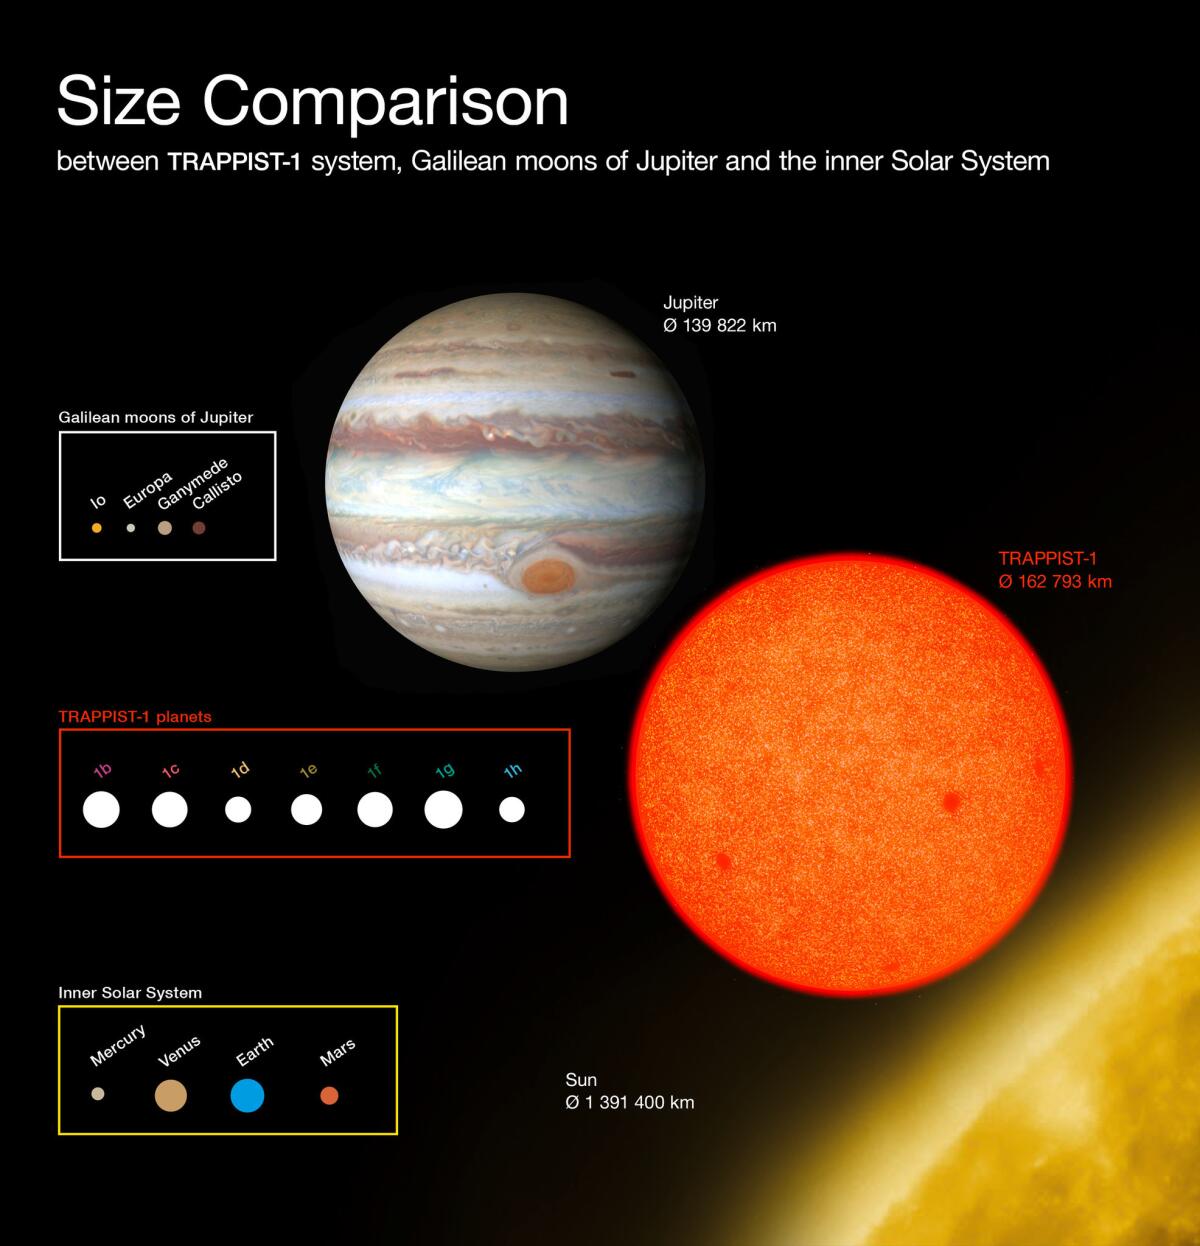 This diagram compares the sizes of the newly discovered planets around the faint red star TRAPPIST-1 with the Galilean moons of Jupiter and the inner Solar System. All the planets found around TRAPPIST-1 are of similar size to the Earth.